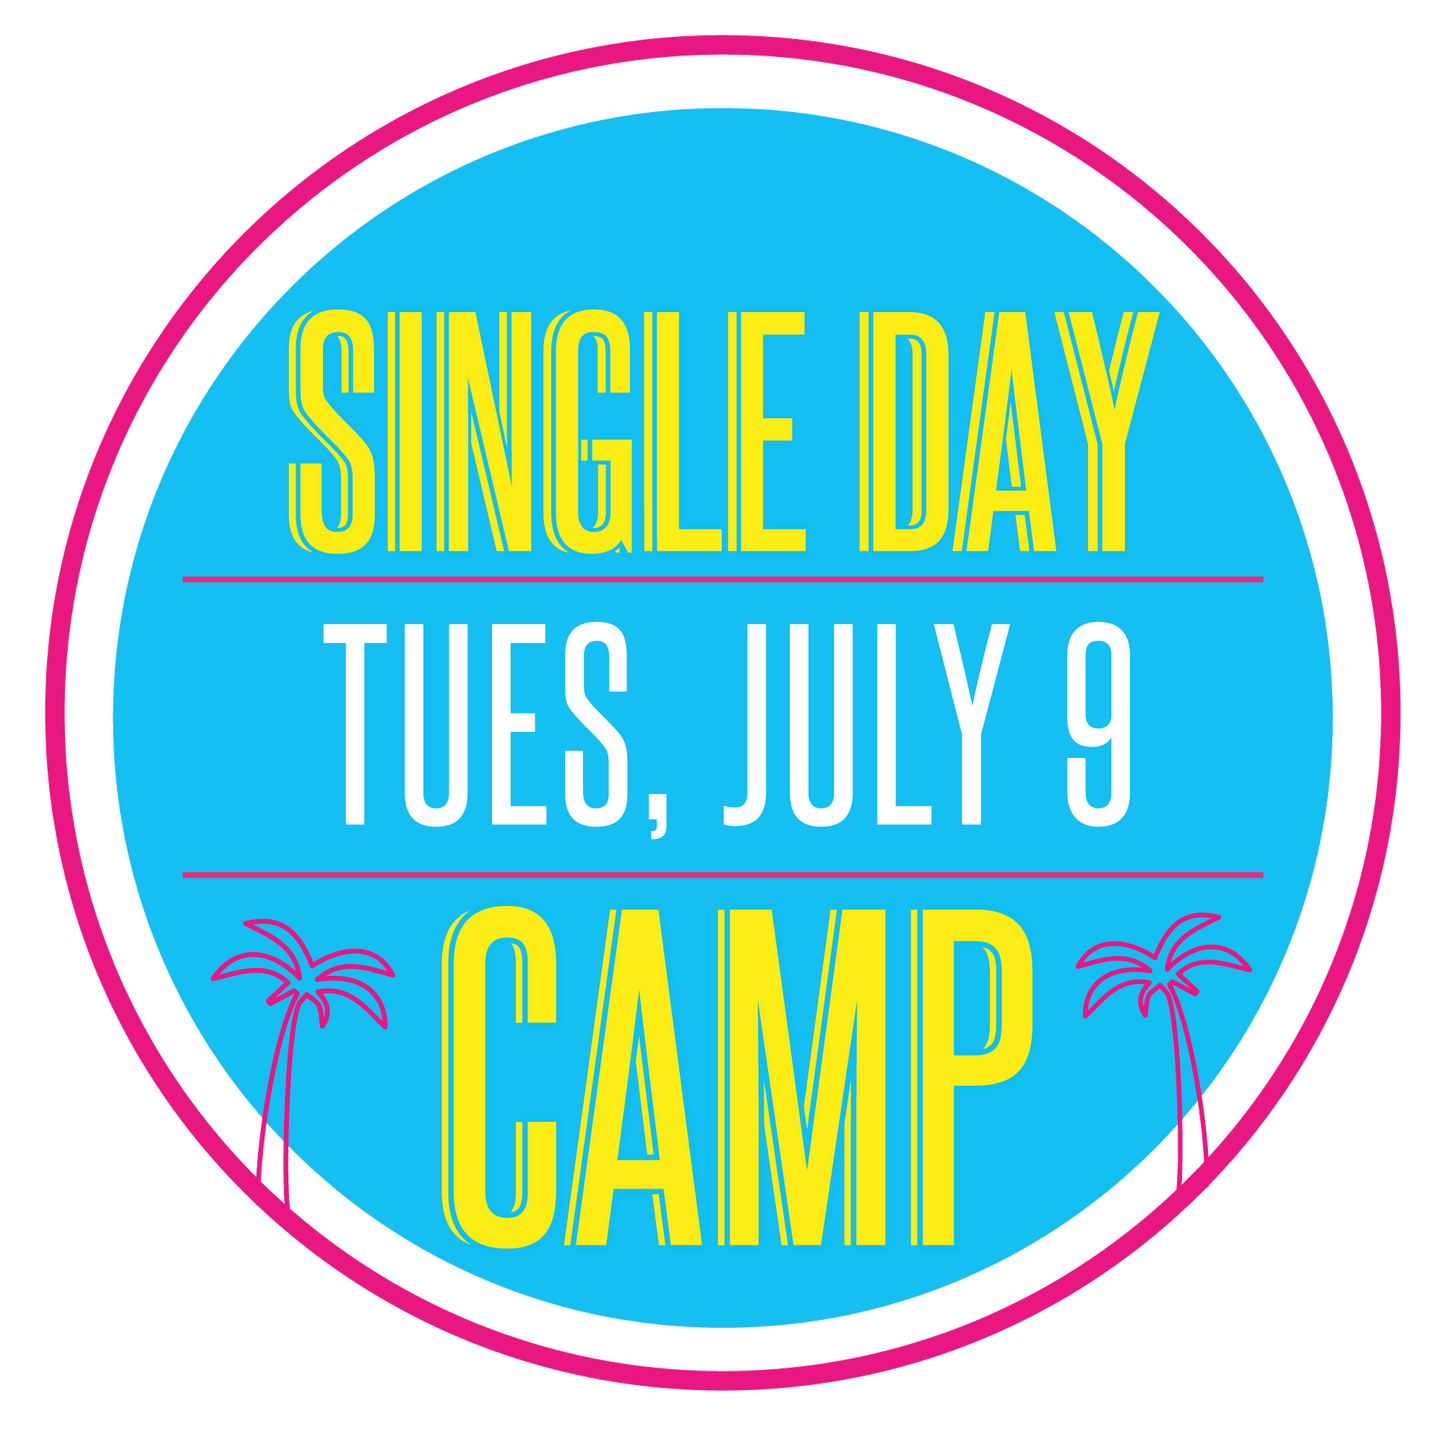 Single Day Sewing Workshop: Tuesday, July 9, 9am-3pm